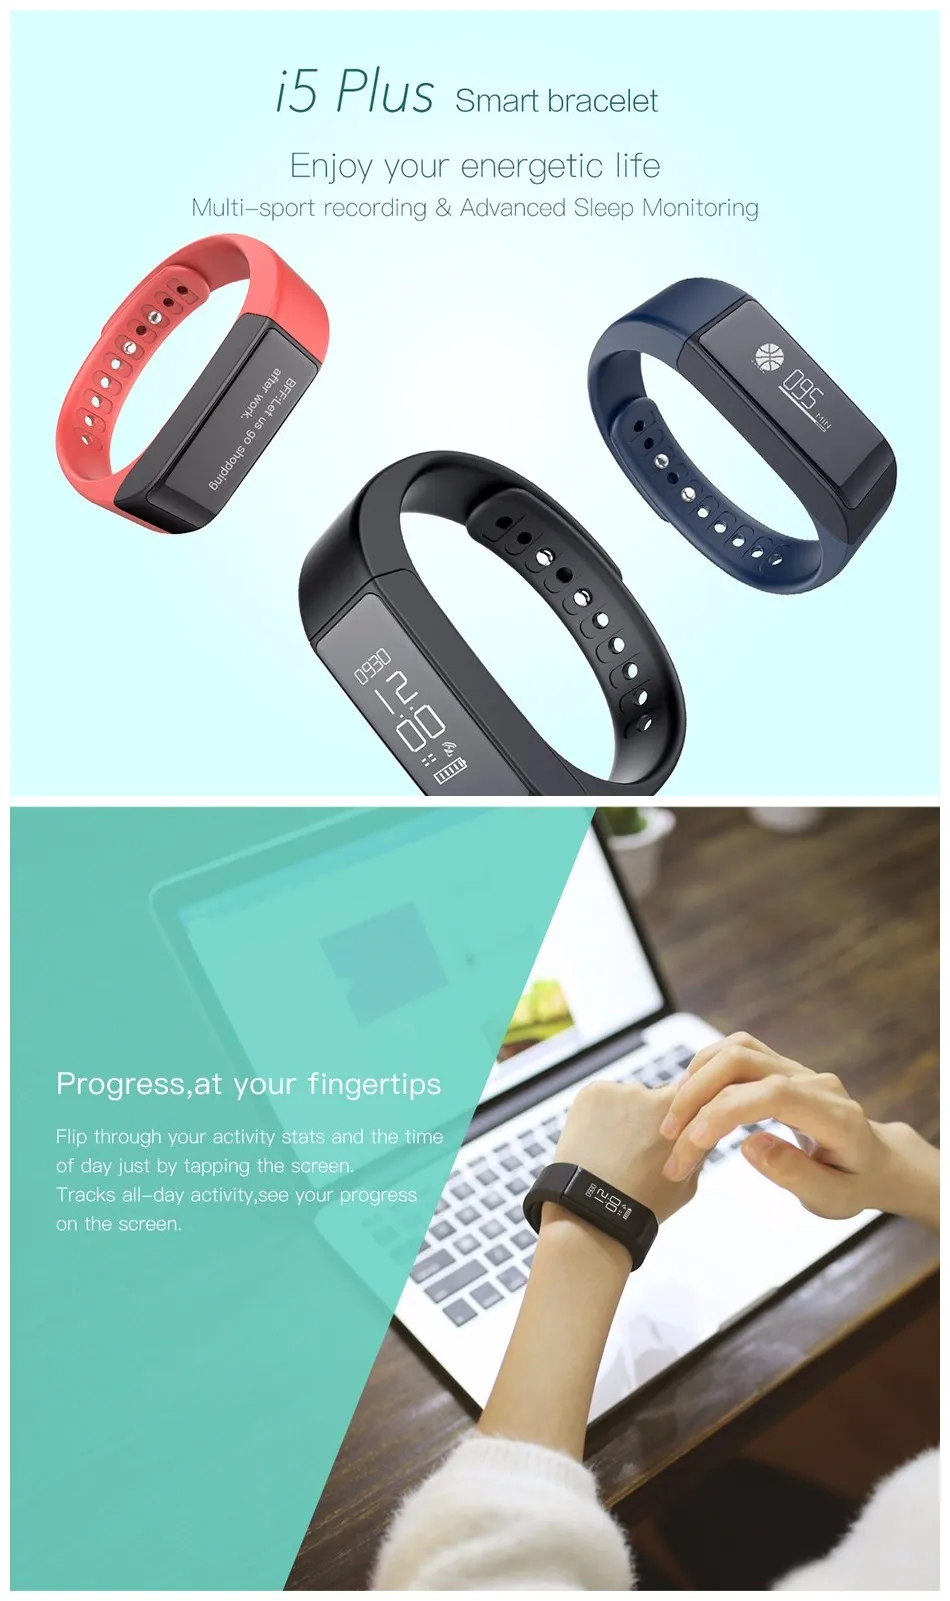 I5 Plus Smart Wristband 0.91" OLED Touch Screen Fitness Tracker Watch Call Reminder Message Push Pedometer Smartband for Sports